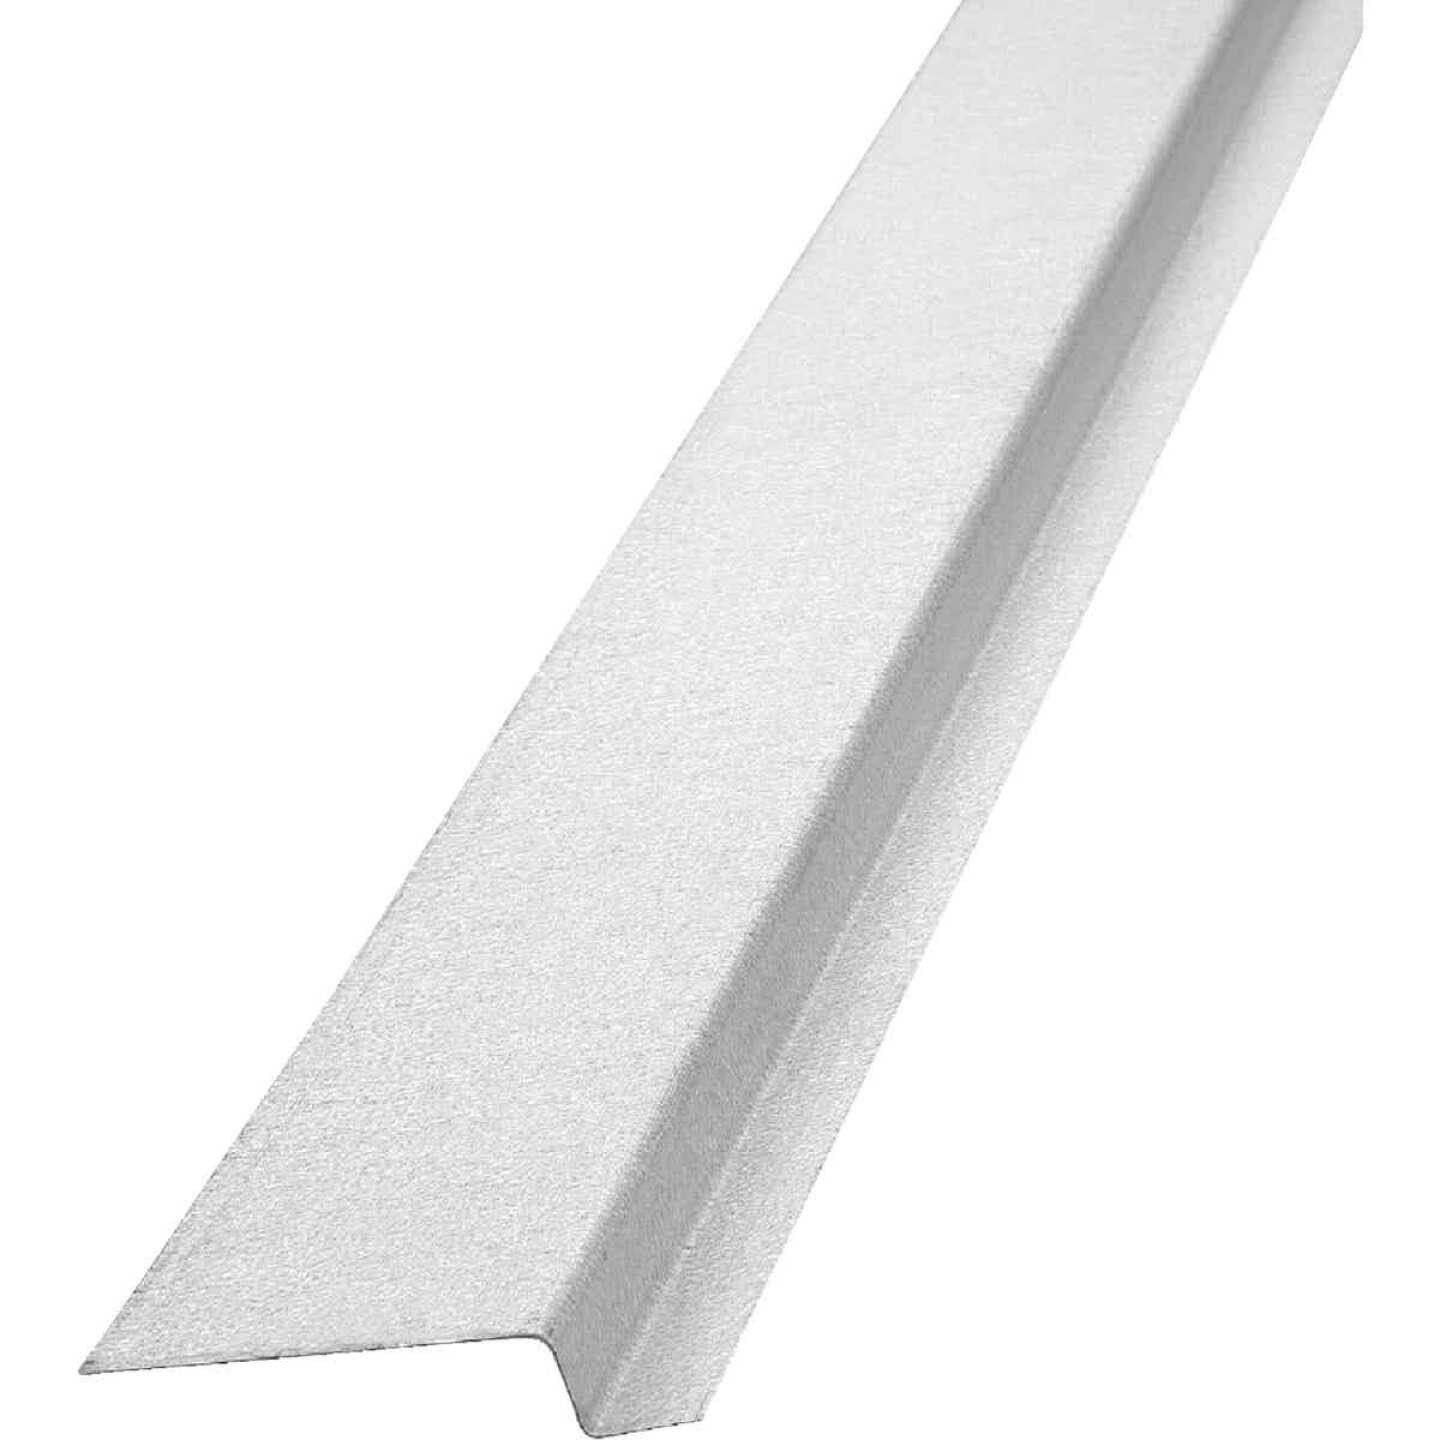 NorWesco 3/8 In. x 3/8 In. x 2-1/4 In. x 10 Ft. Mill Galvanized Ply Edge Z-Style Flashing Image 1